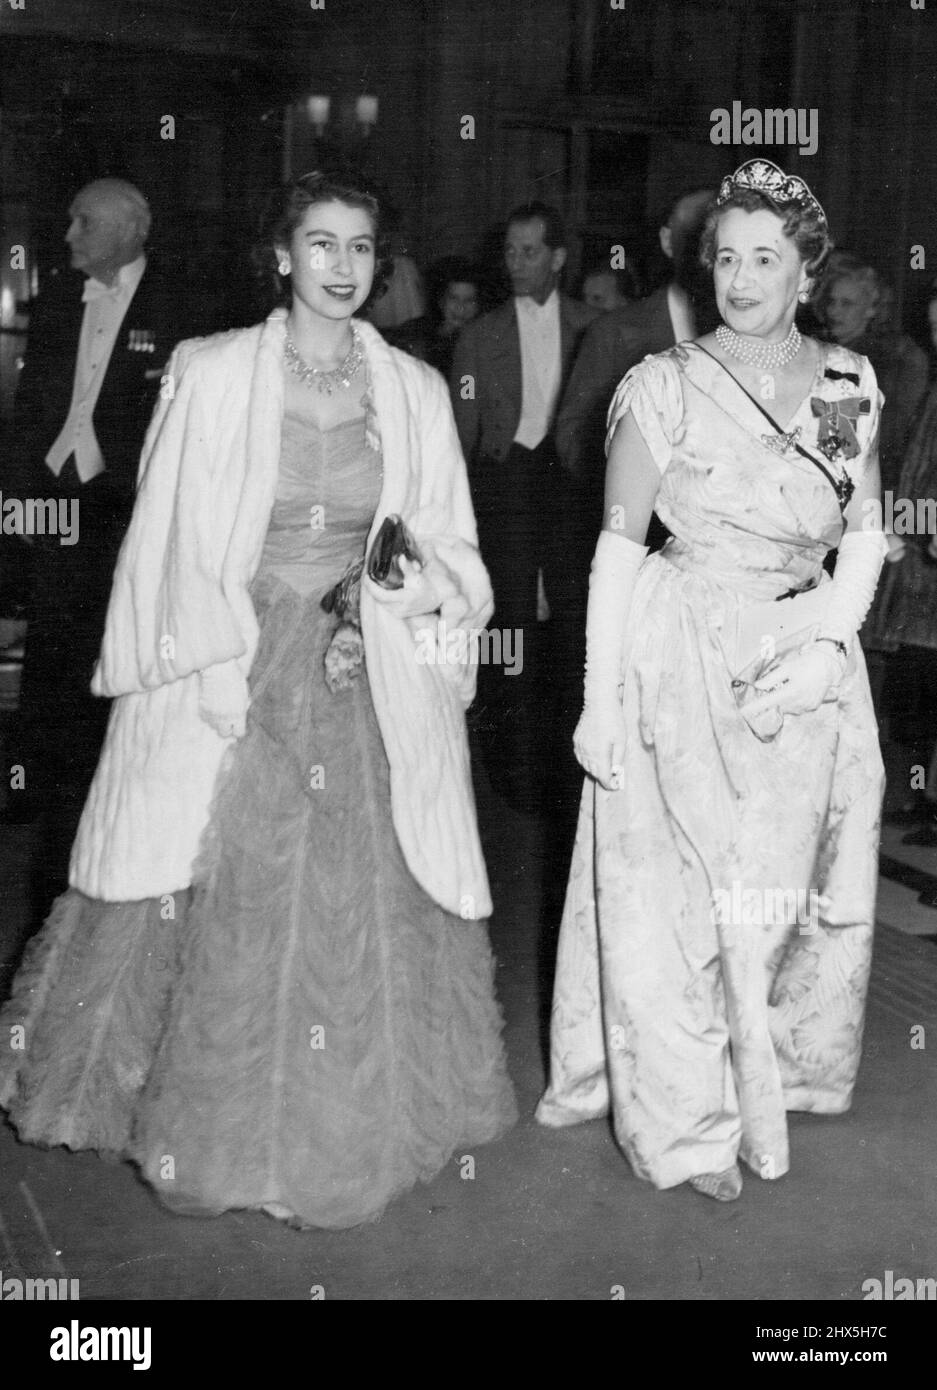 Princess Elizabeth Attends Dinner to Mrs. Roosevelt. Princess Elizabeth (left) arriving for the dinner reception with viscountess Greenwood, wire of the Viscount Greenwood (Chairman of the Memorial Committee of the Pilgrims') at the Savoy Hotel. Mrs Eleanor Roosevelt, who had earlier unveiled the memorial statue to the late President Franklin Delano Roosevelt in Grosvenor Square, was the guest of honour at a dinner given by the Pilgrims' Society at the Savoy Hotel, where tributes were paid the late President. April 13, 1948. Stock Photo